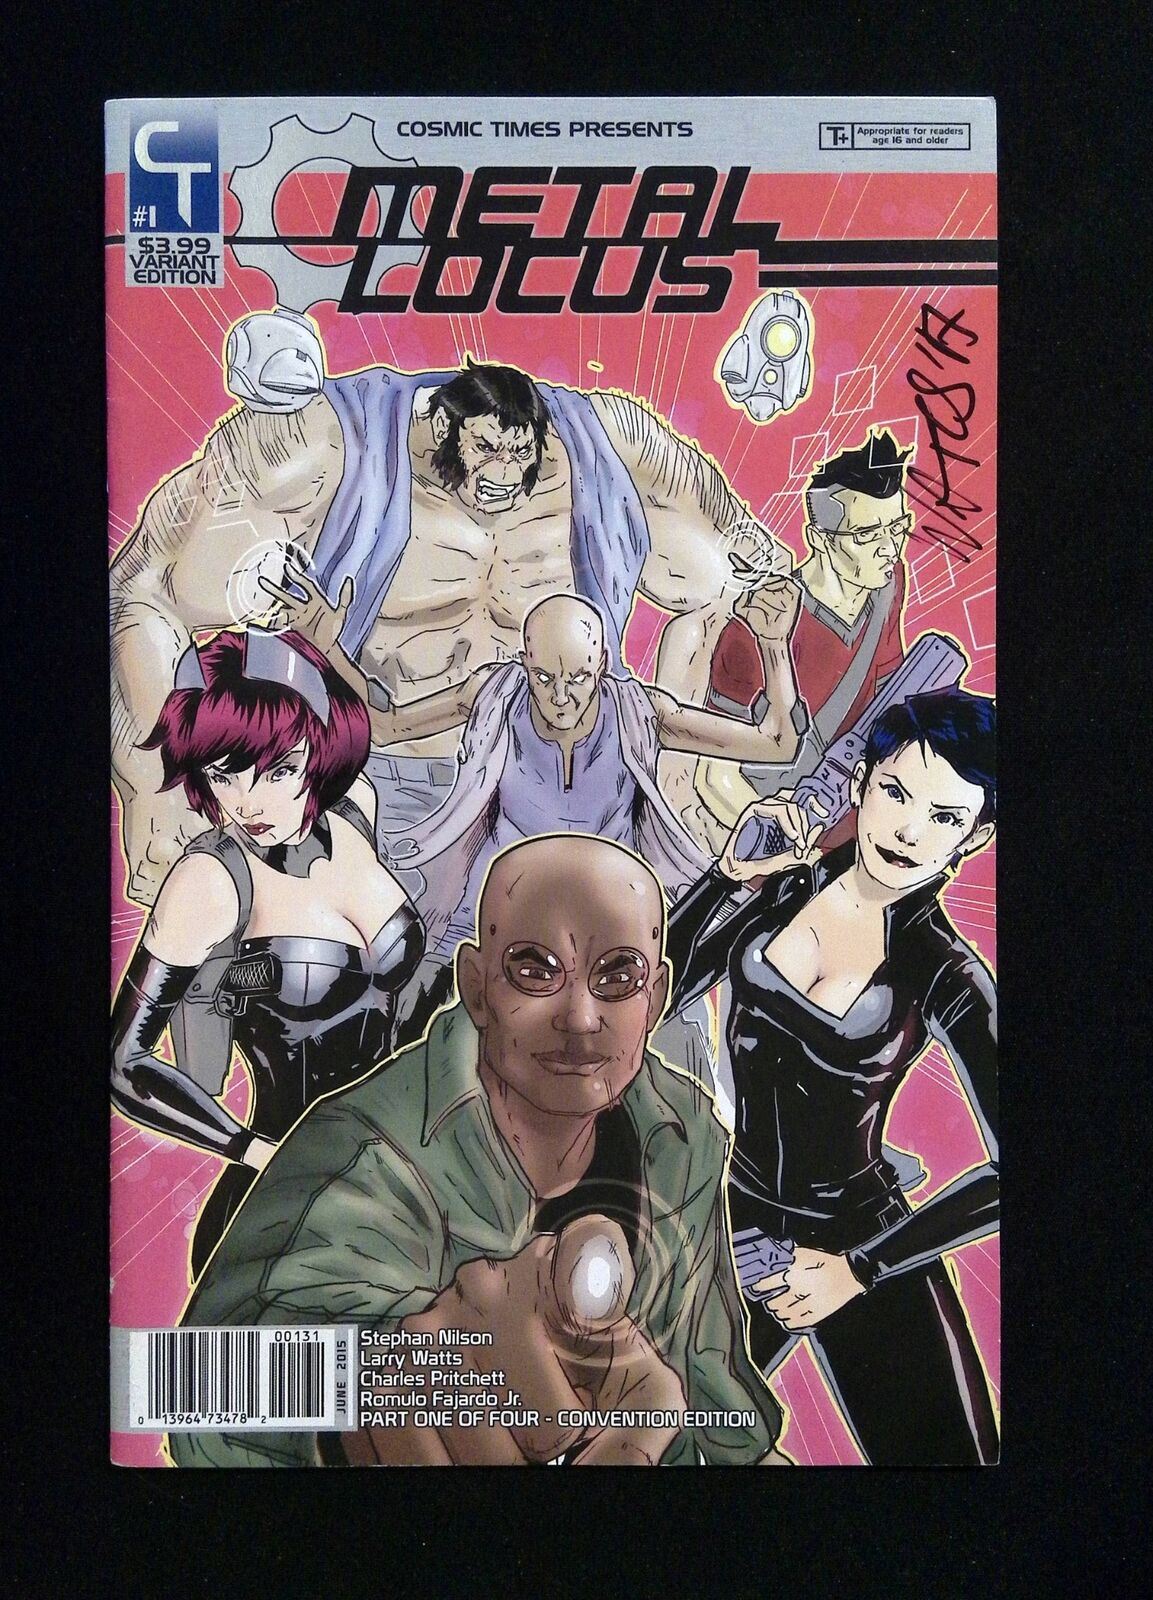 Metal Locus #1 Cosmic Times 2015 VF+ CONVENTION VARIANT SIGNED BY WATTS, RARE!